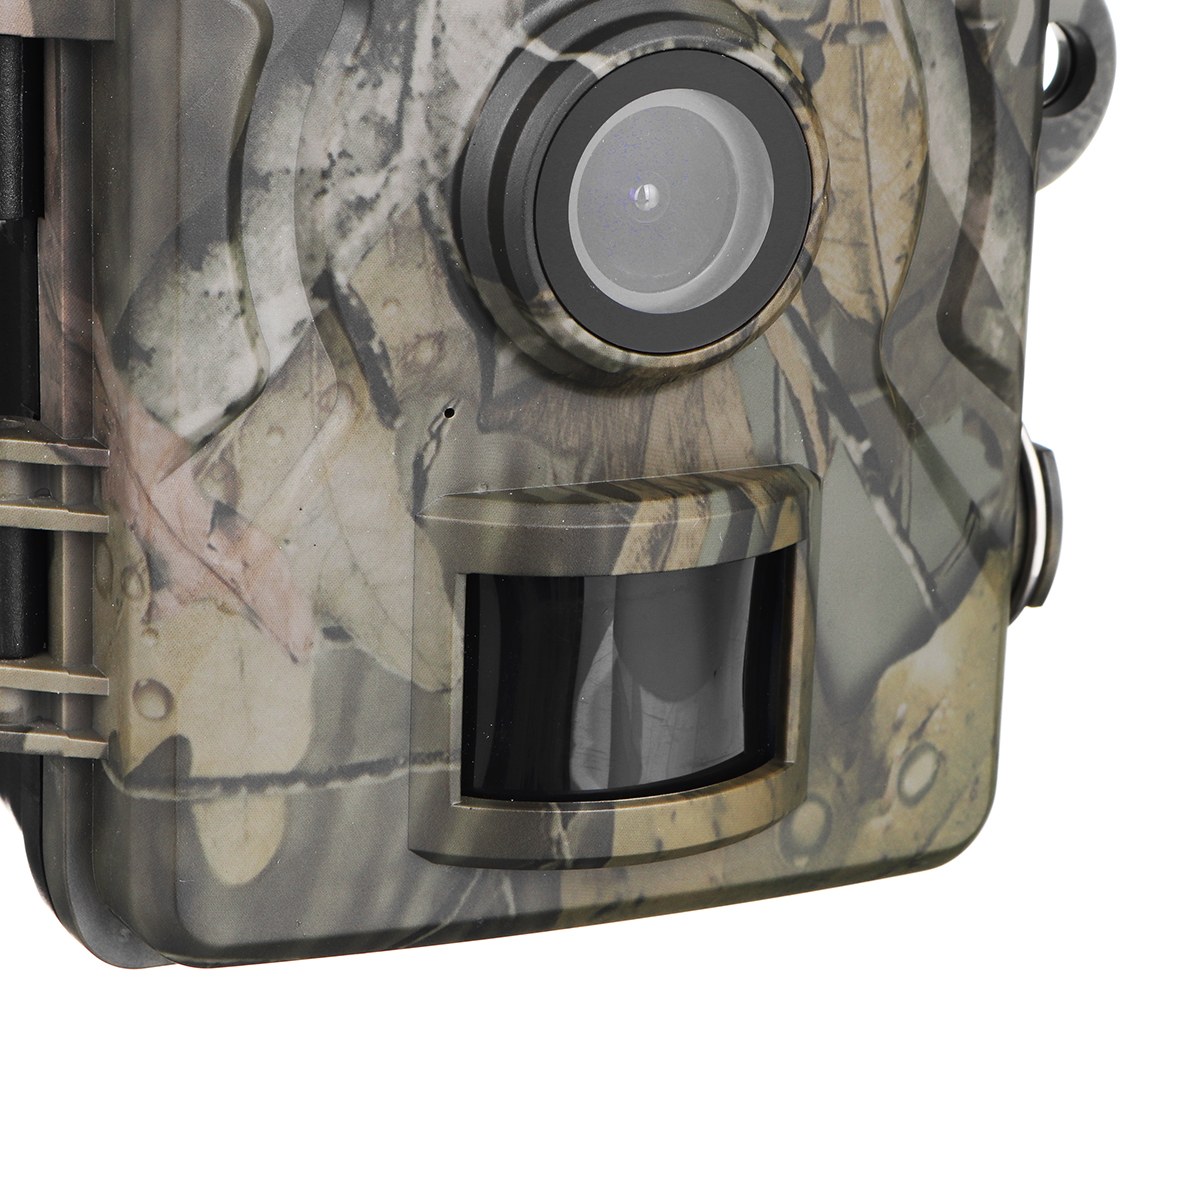 Find DL001 16MP 1080P HD 2 inch Screen Hunting Camera IR Night Vision Waterproof Scouting Camera Monitoring Protecting Farms Safety for Sale on Gipsybee.com with cryptocurrencies